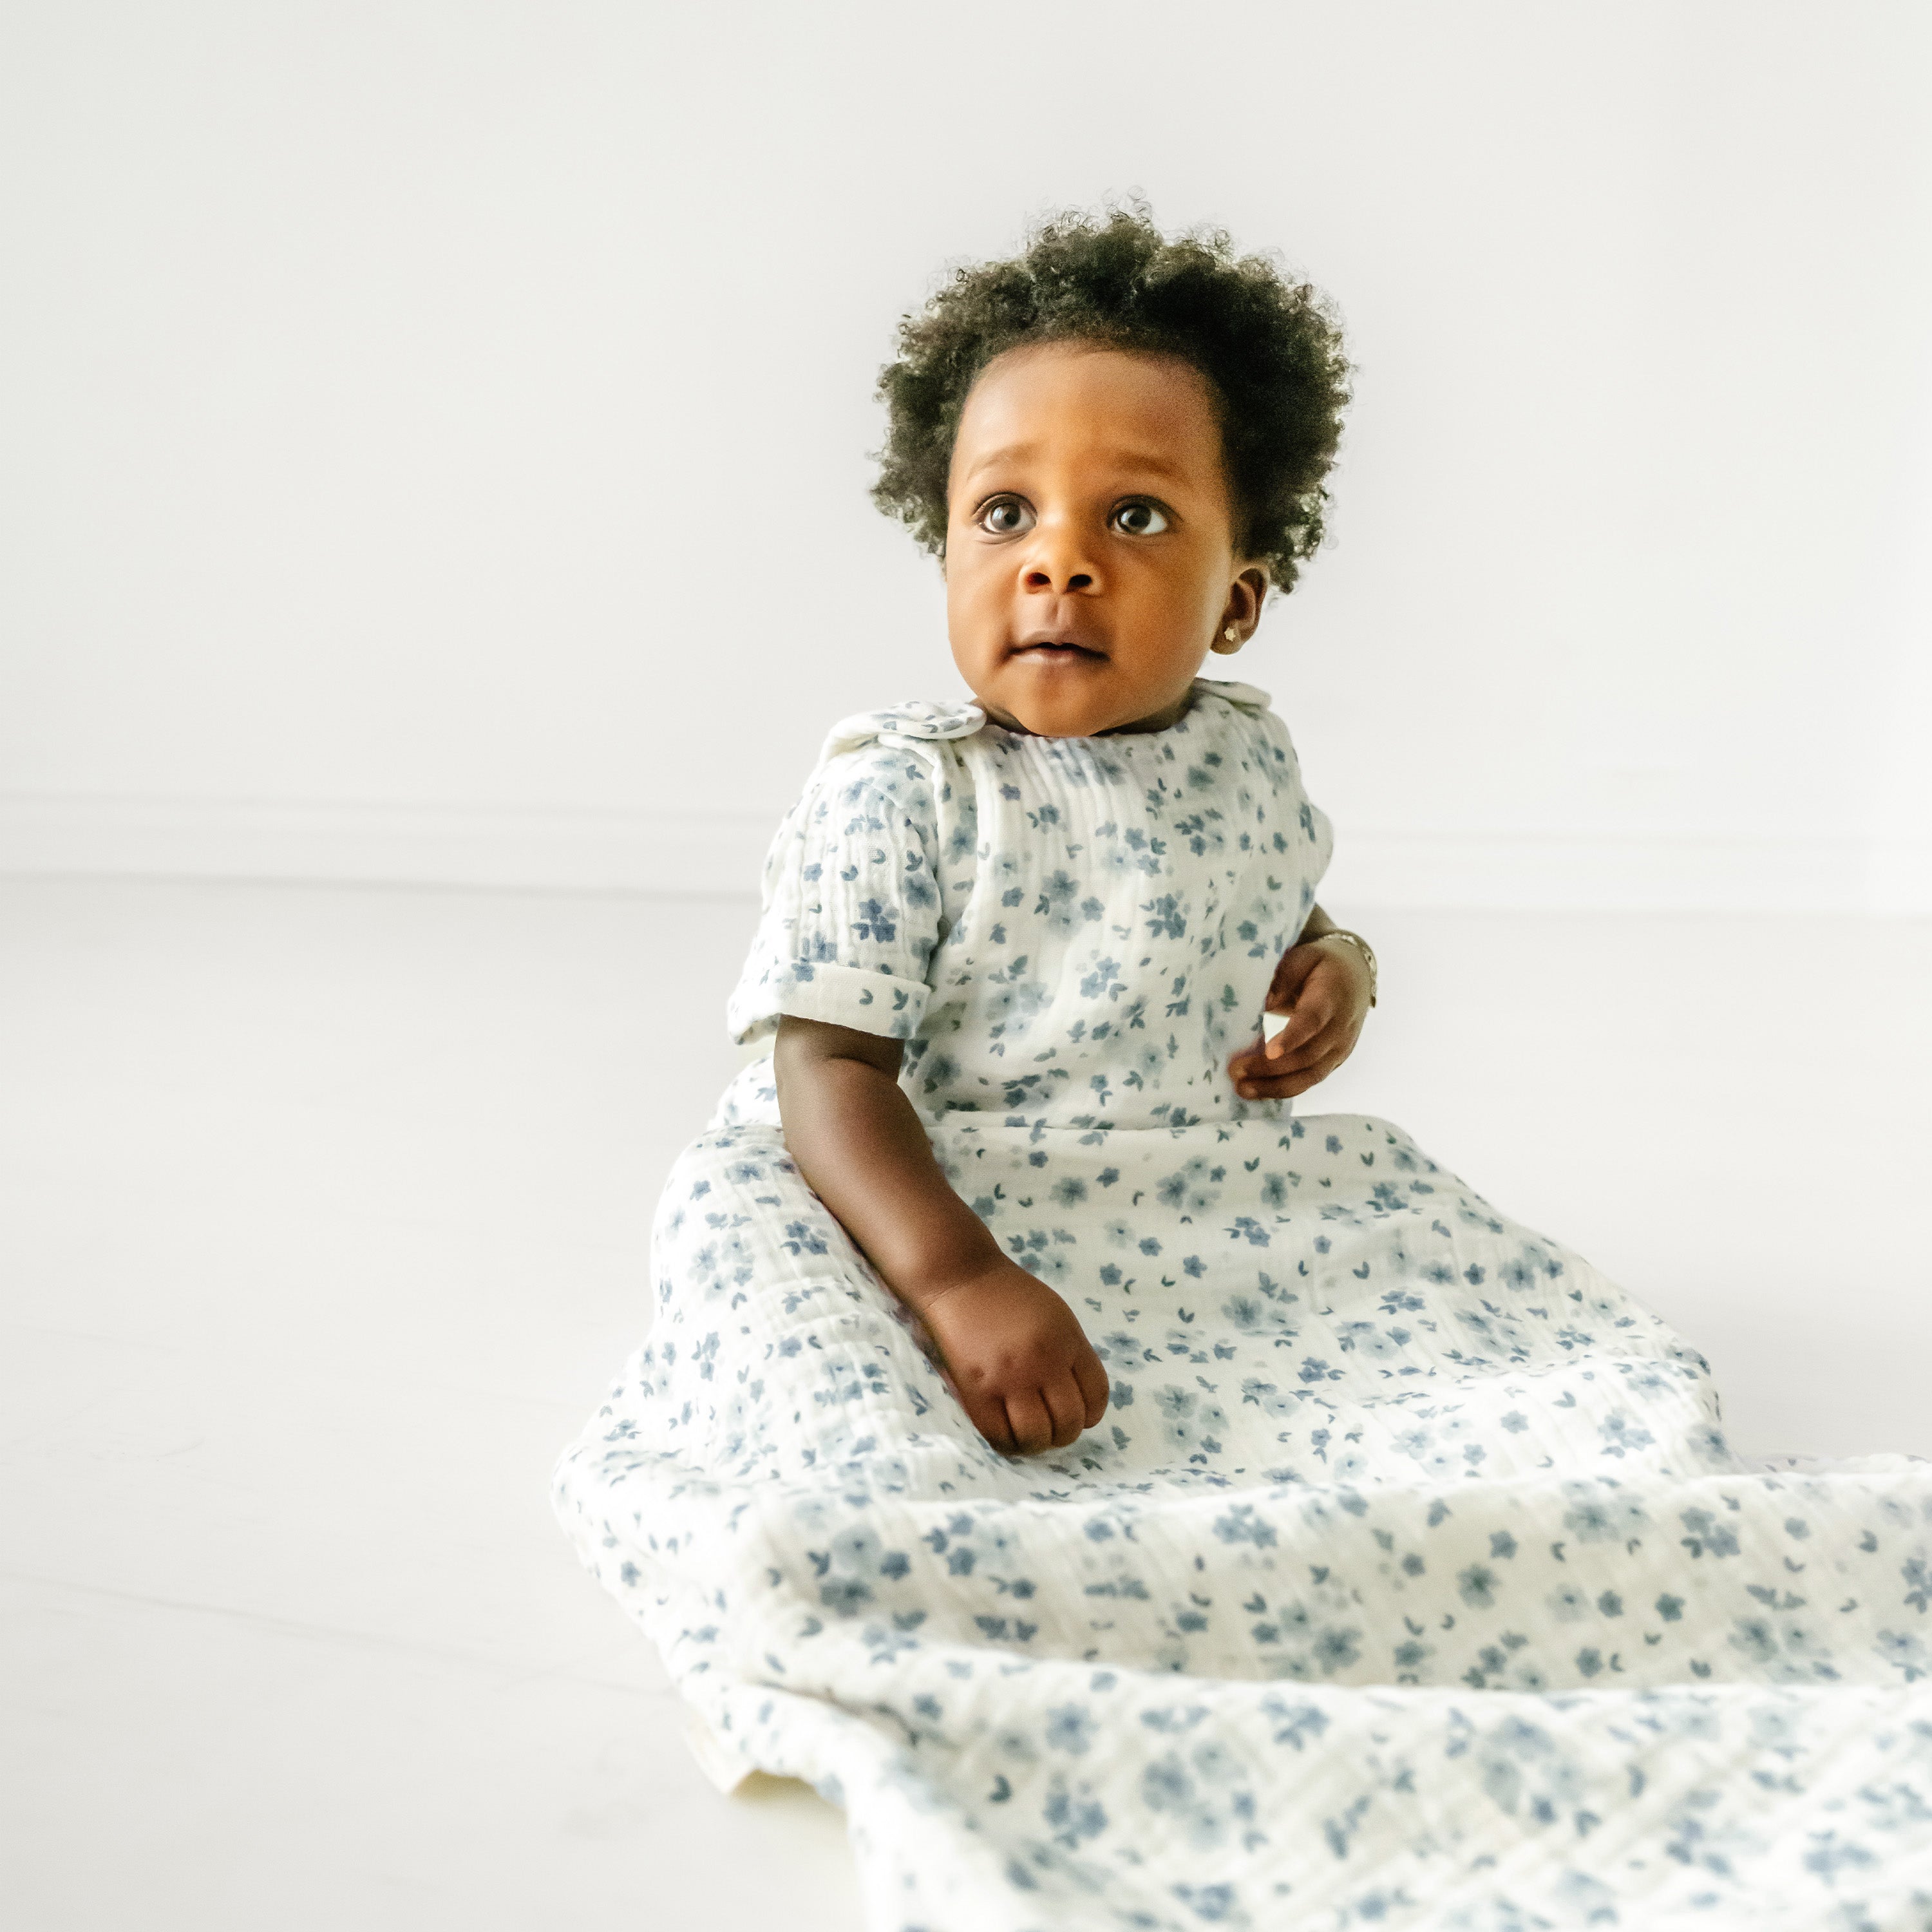 A toddler with curly hair sits on a Makemake Organics Muslin Wearable Blanket in Periwinkle, wearing a floral dress, looking up with a curious expression in a bright, airy room.